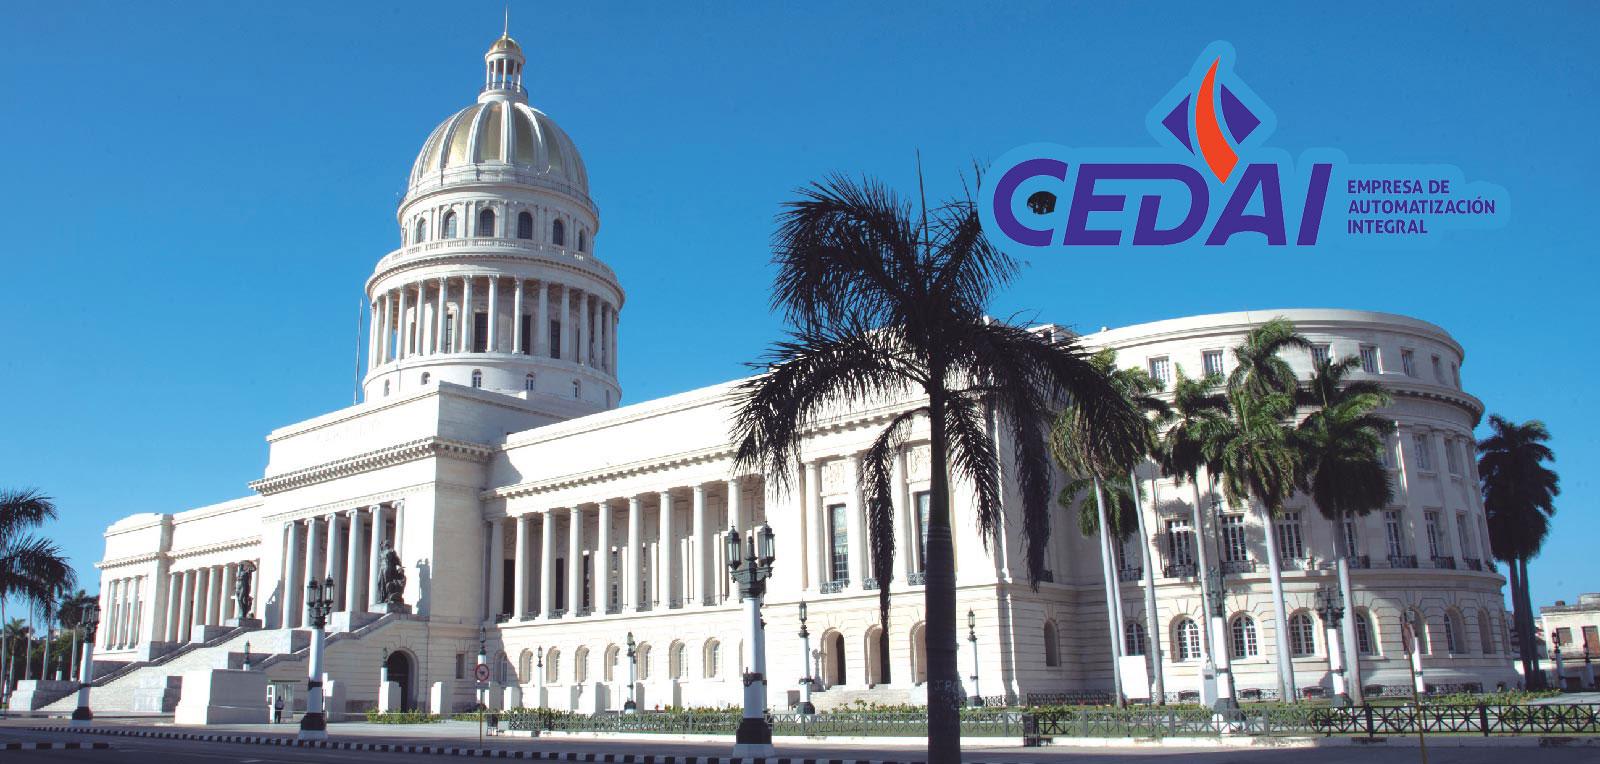 CEDAI: exporting its services